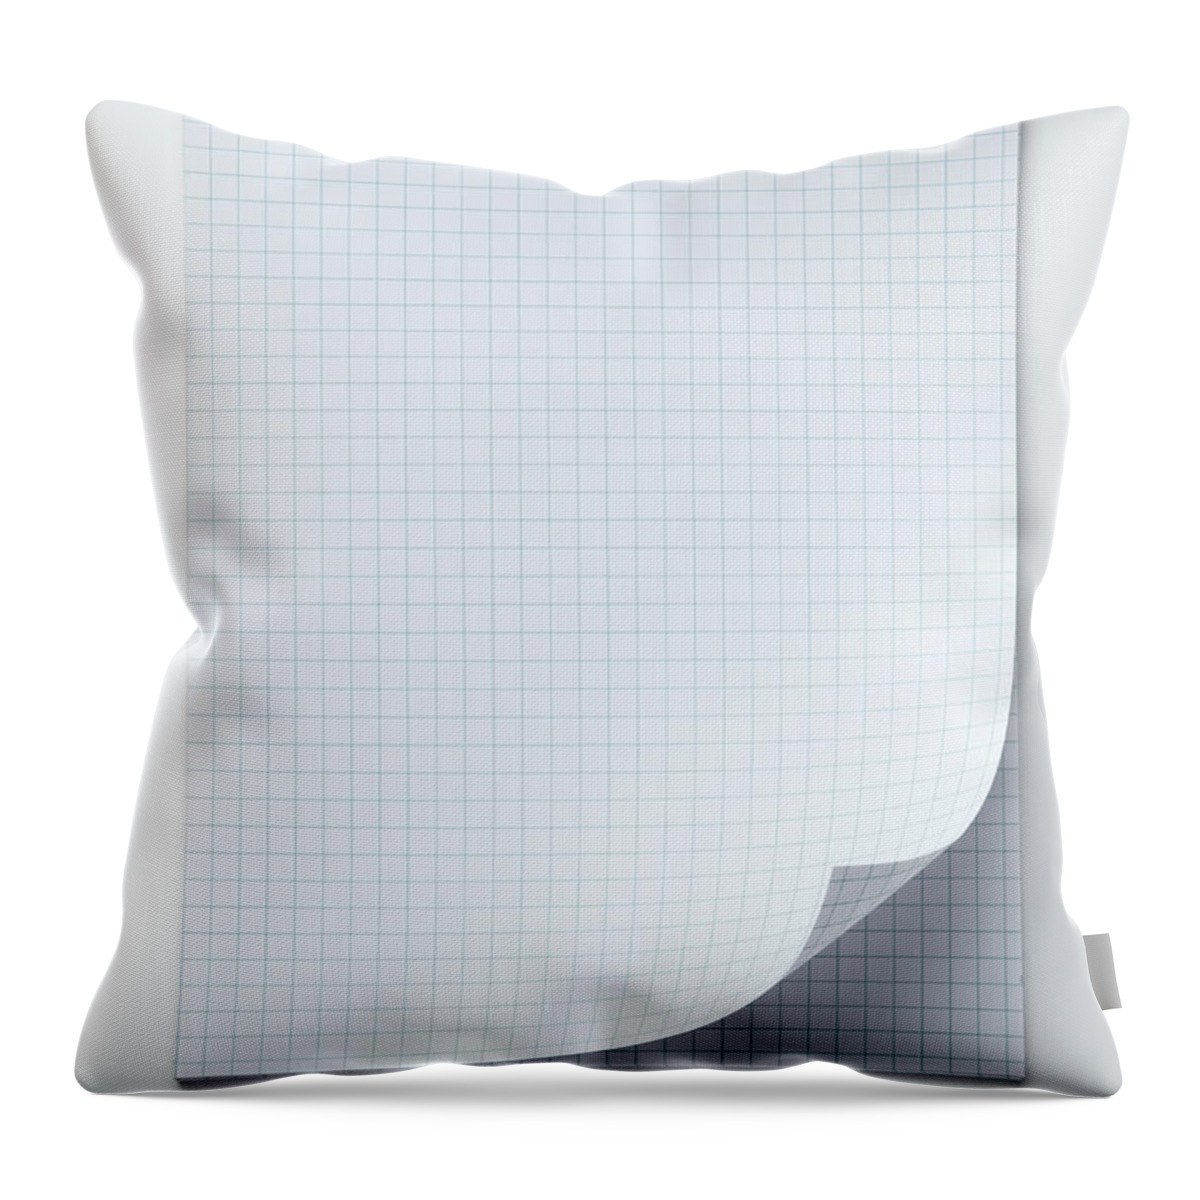 Shadow Throw Pillow featuring the photograph A Spiral Notepad With Graph Paper And A by Caspar Benson